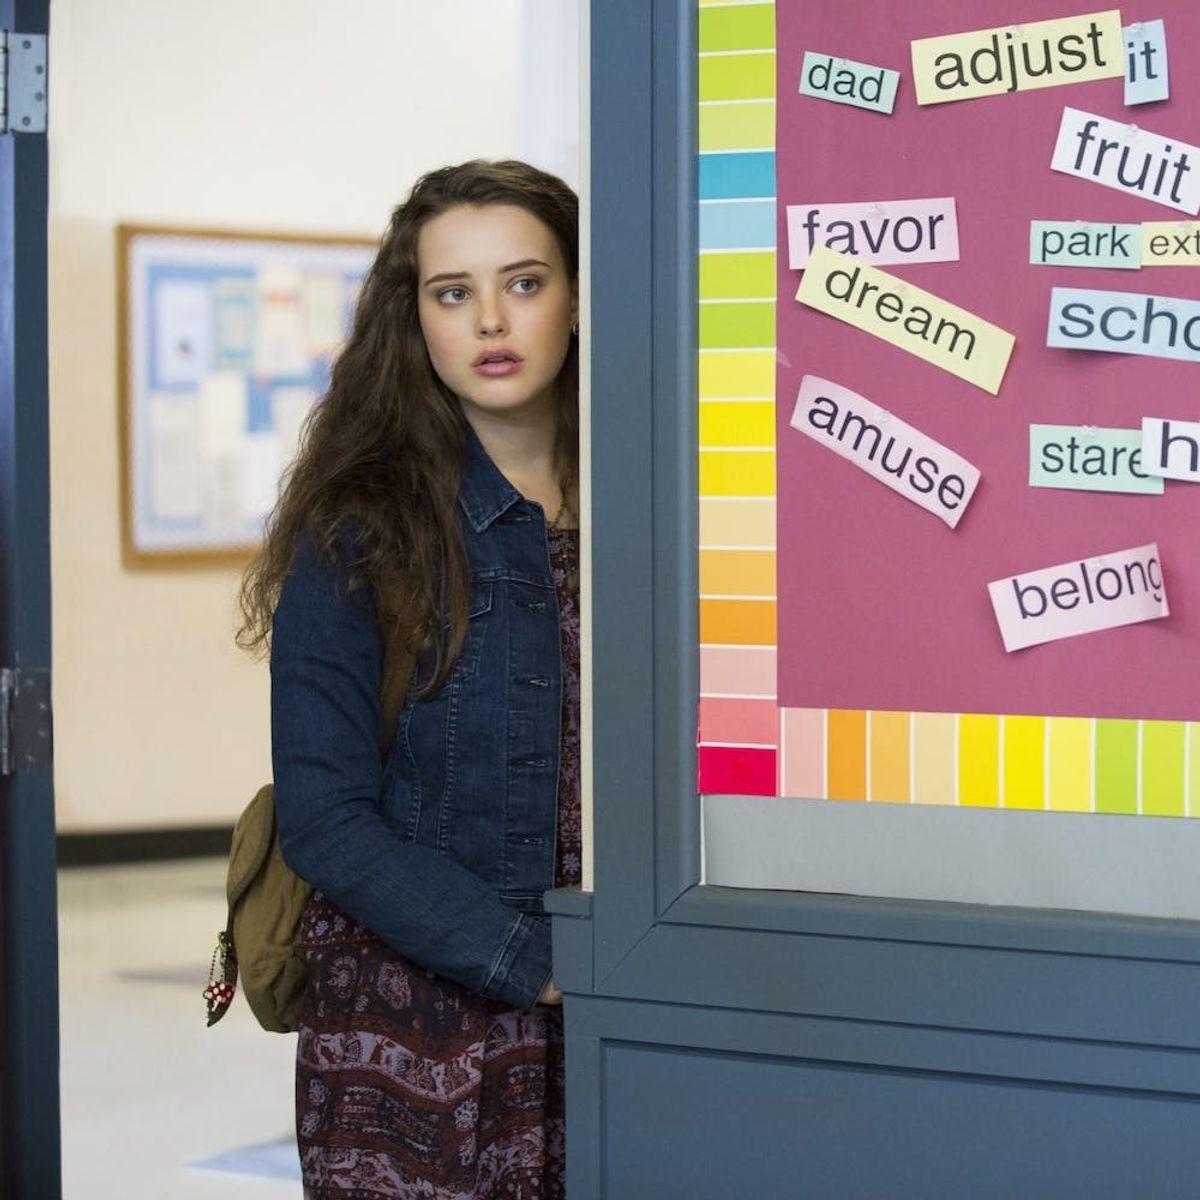 A Psychologist Explains How 13 Reasons Why Isn’t Really About Mental Health